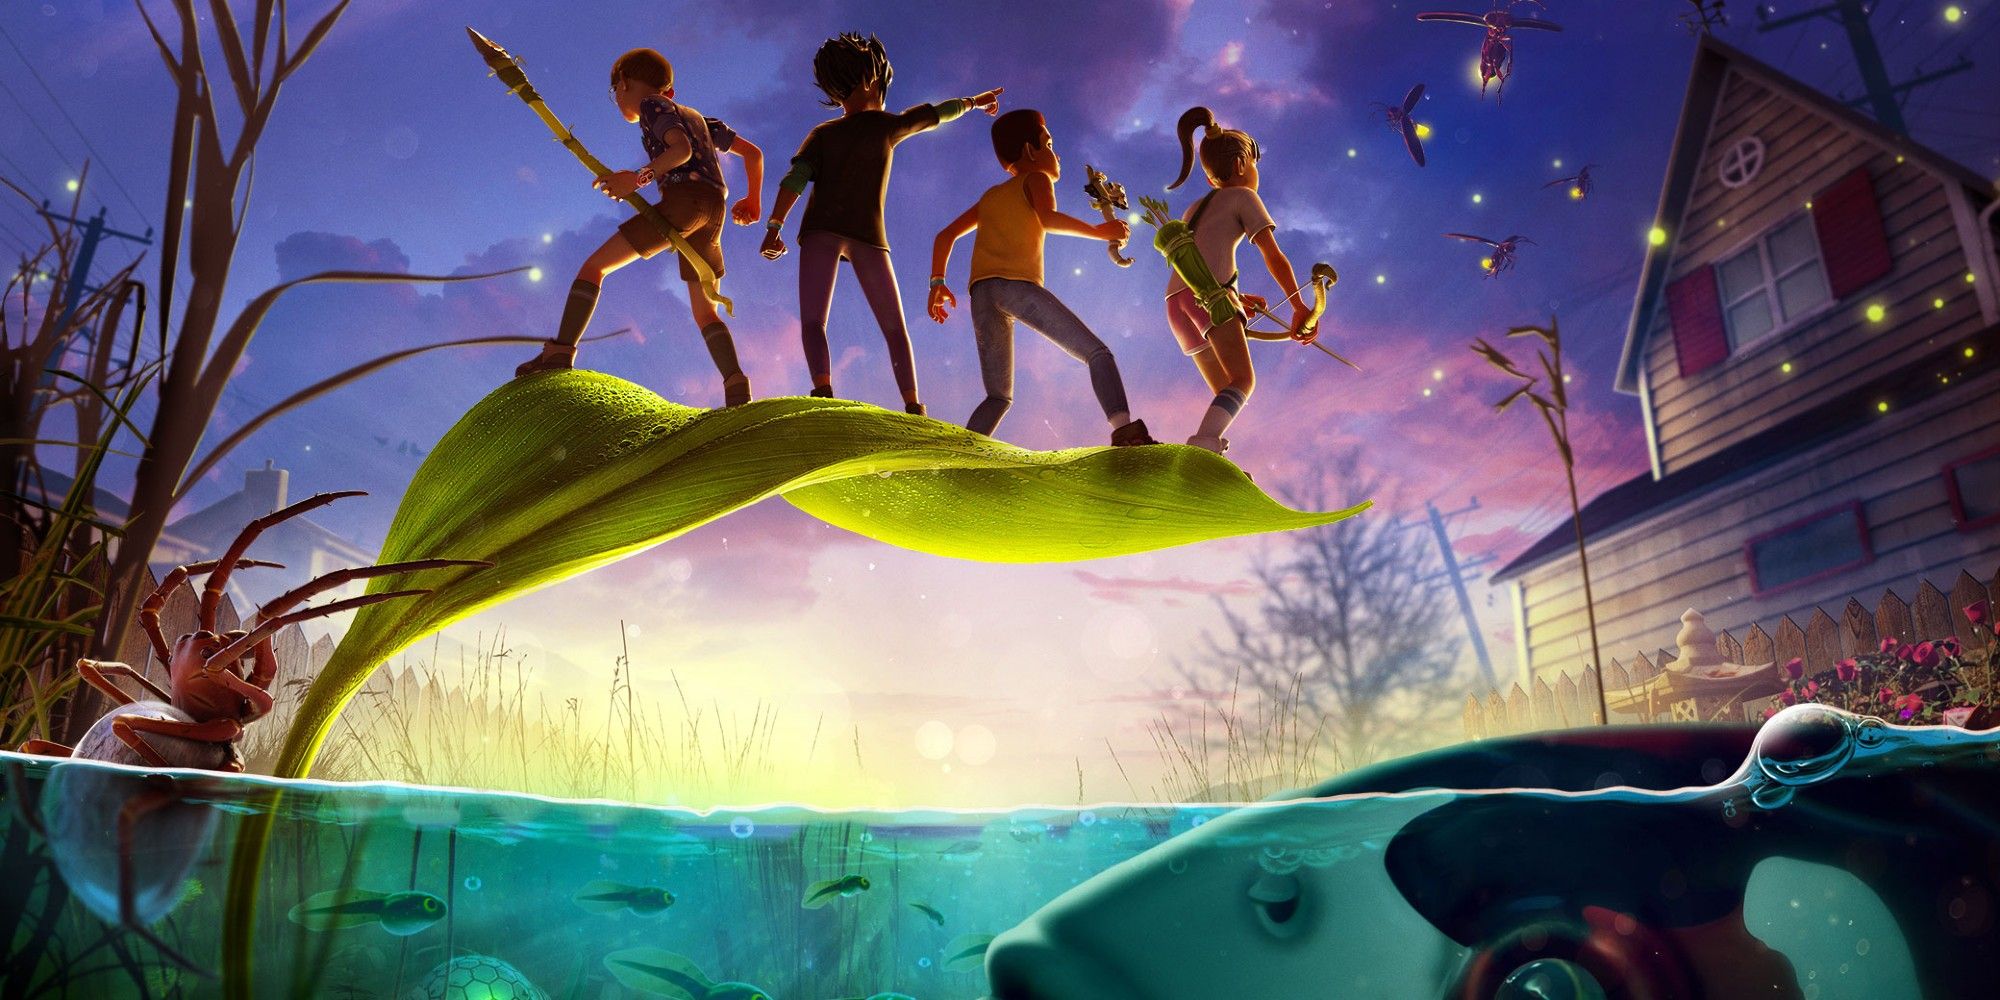 The four main characters stand on a leaf above the pond in Grounded.